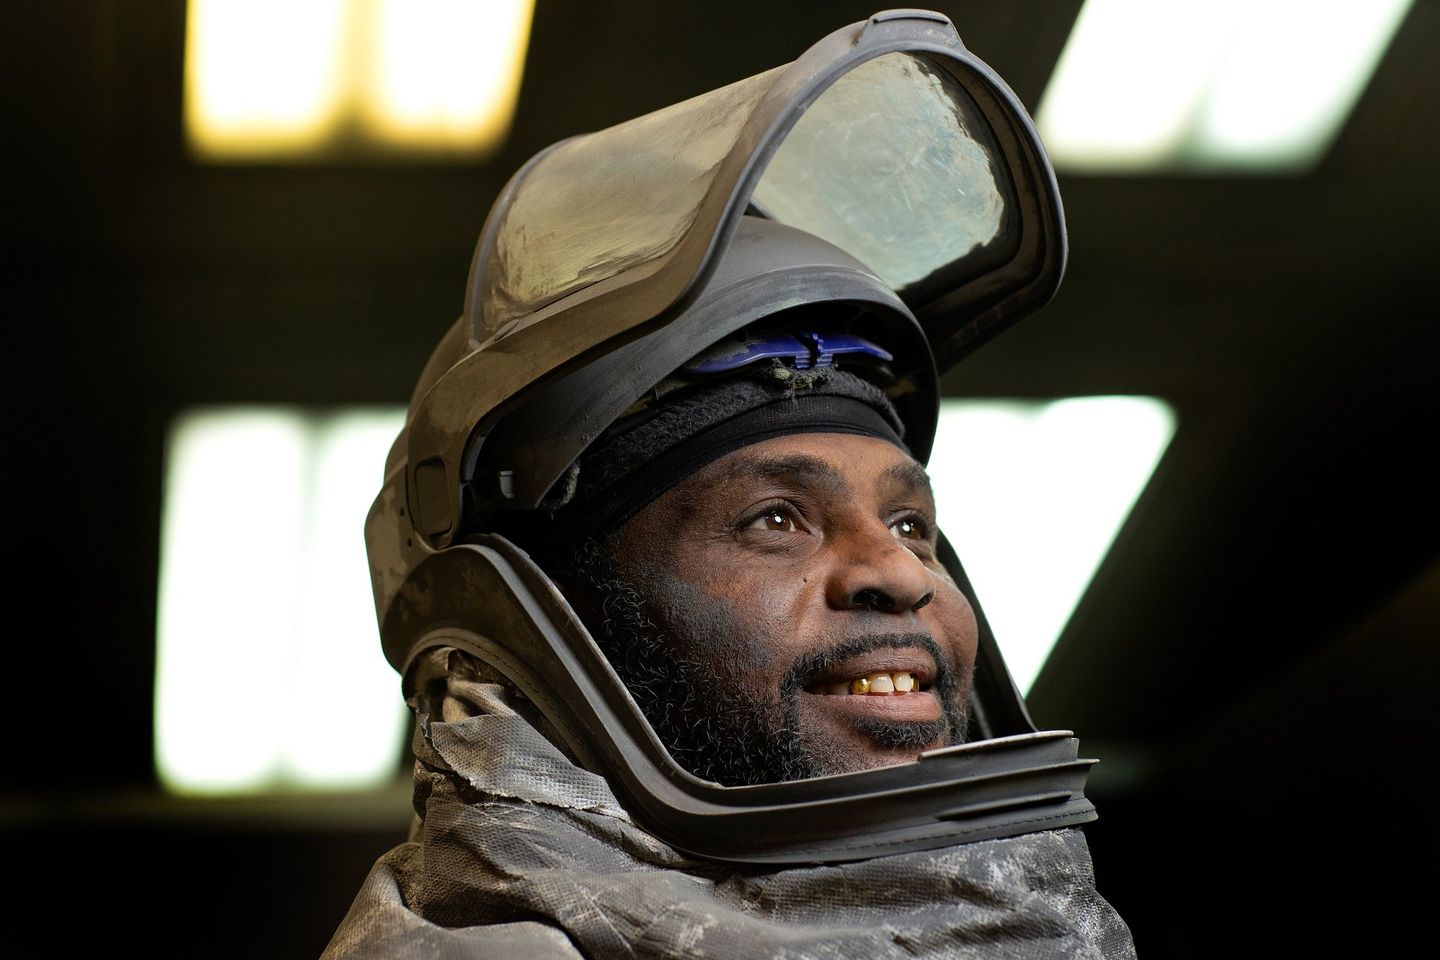 A man wearing a full-body suit used in industrial applications is posing for a photo. He is not looking at the camera. His face shield is up so his face is visible. He looks happy. 